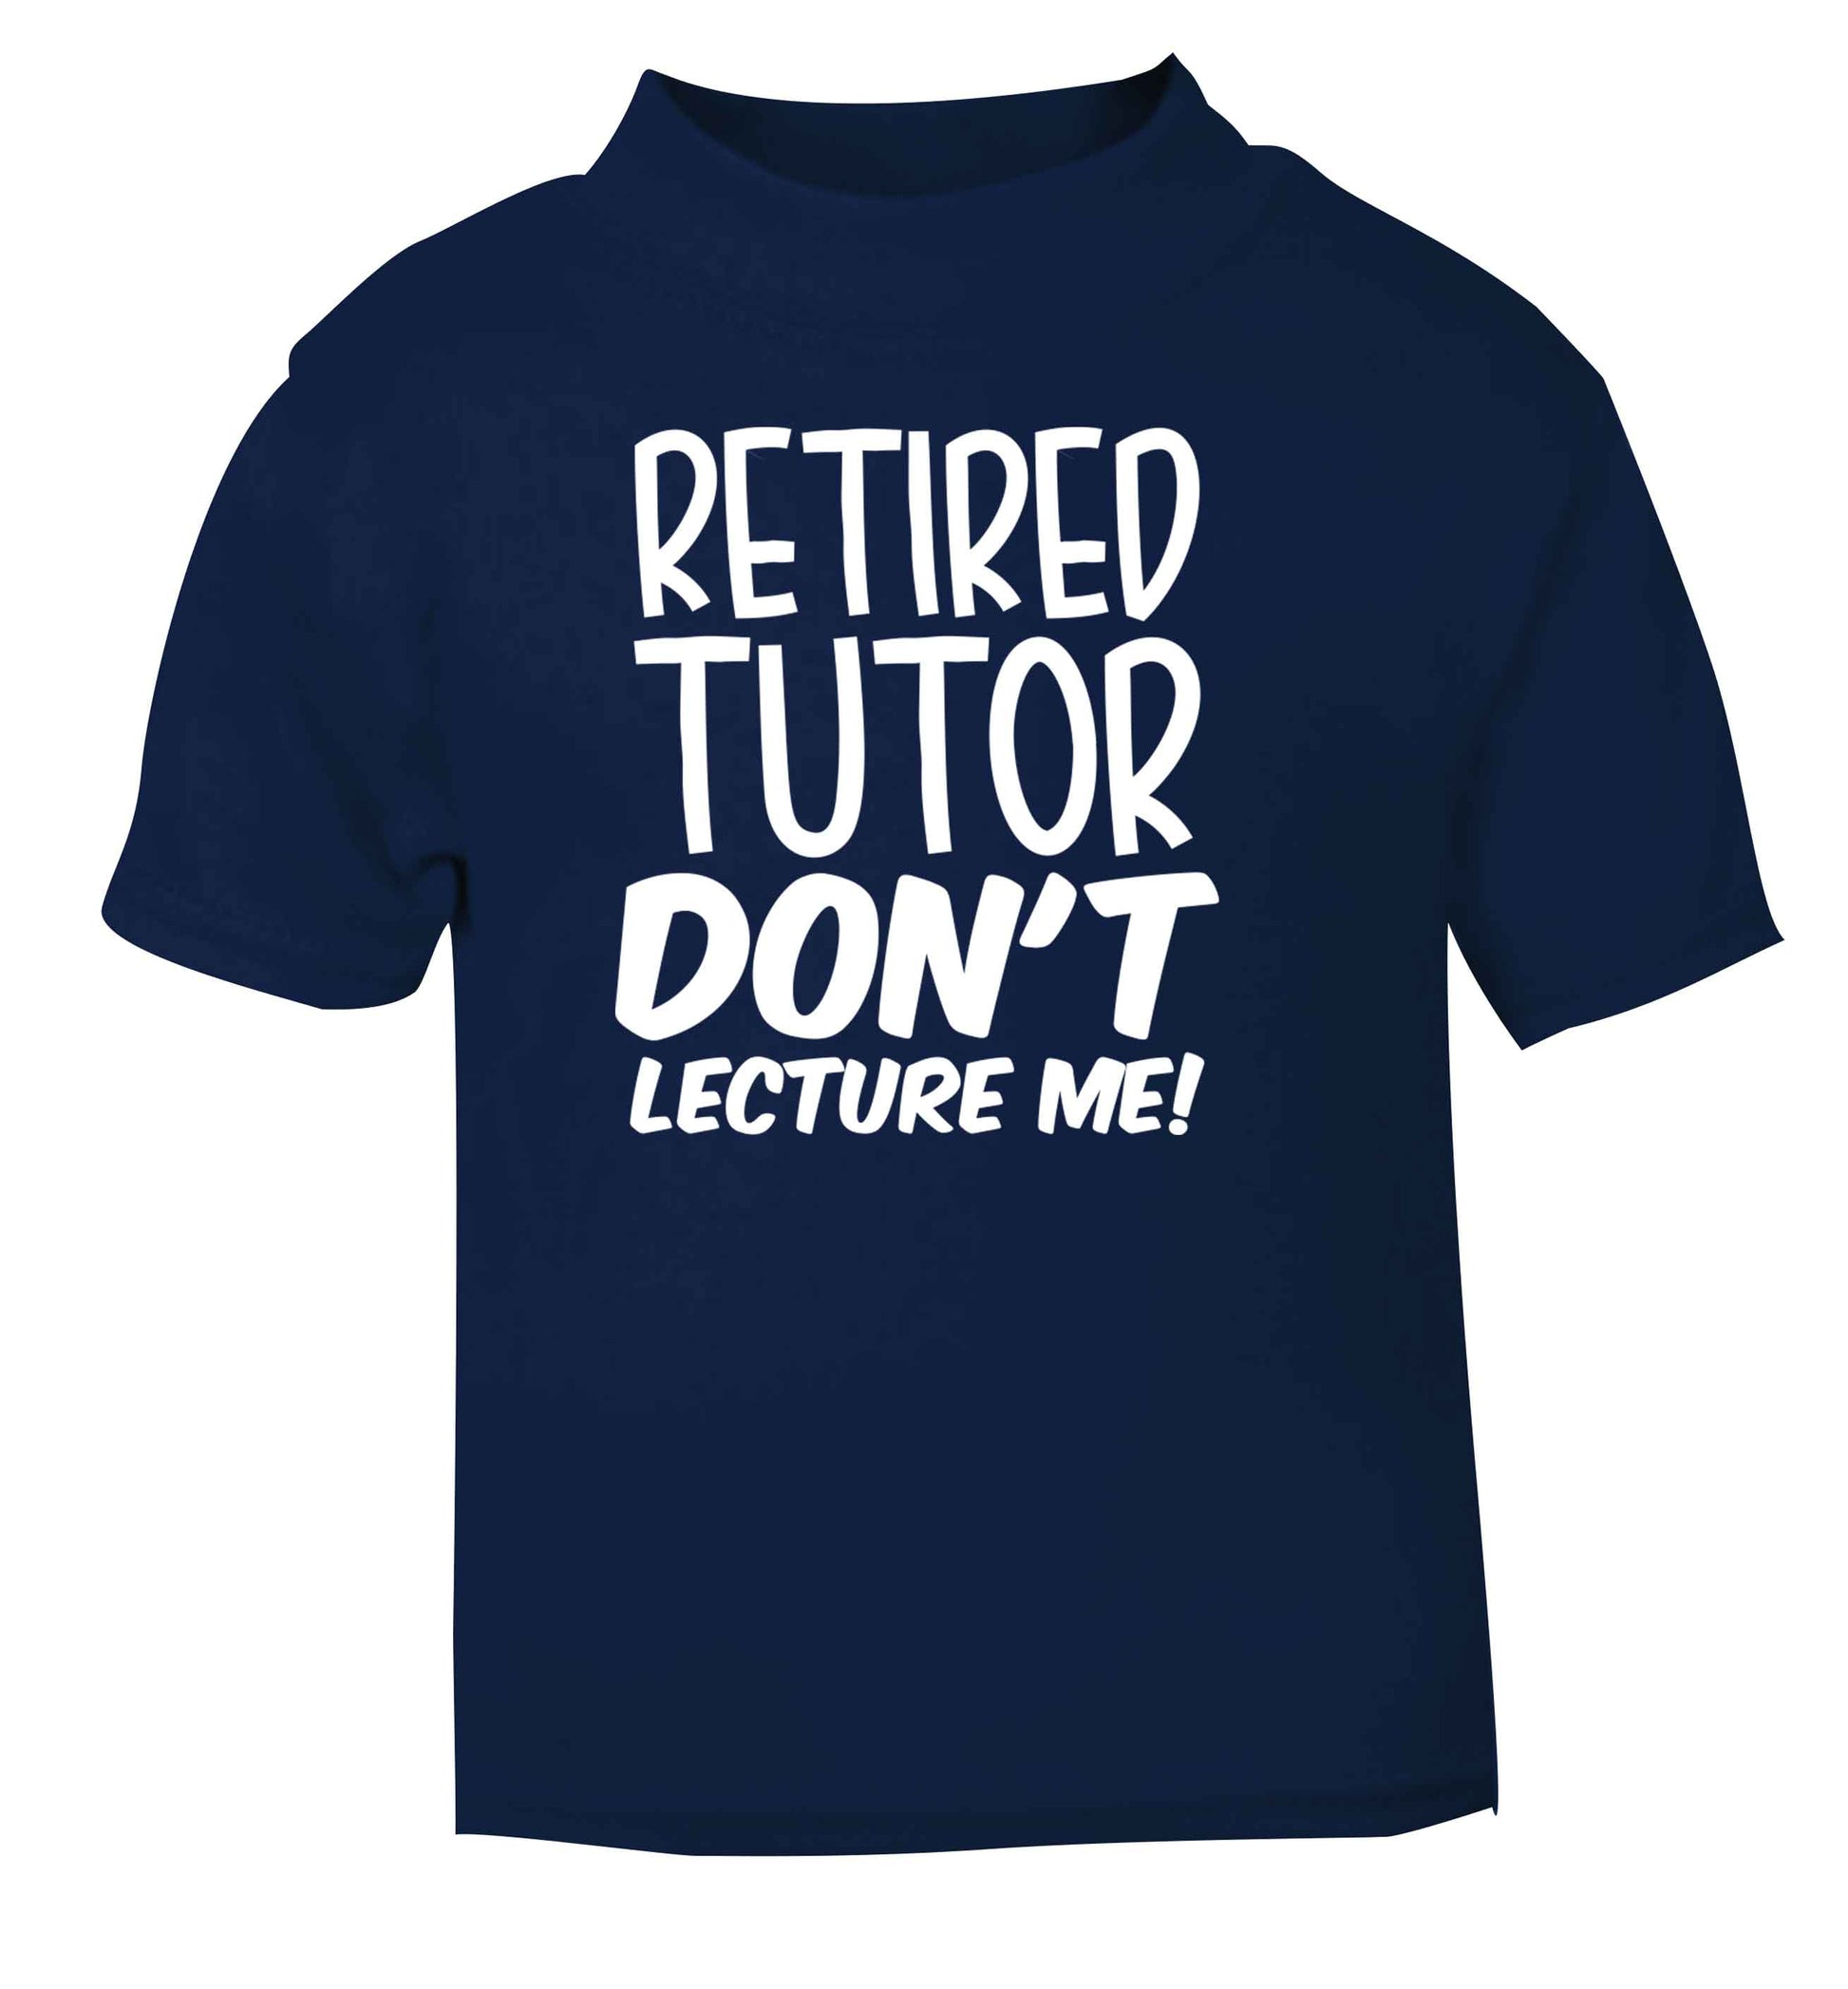 Retired tutor don't lecture me! navy Baby Toddler Tshirt 2 Years